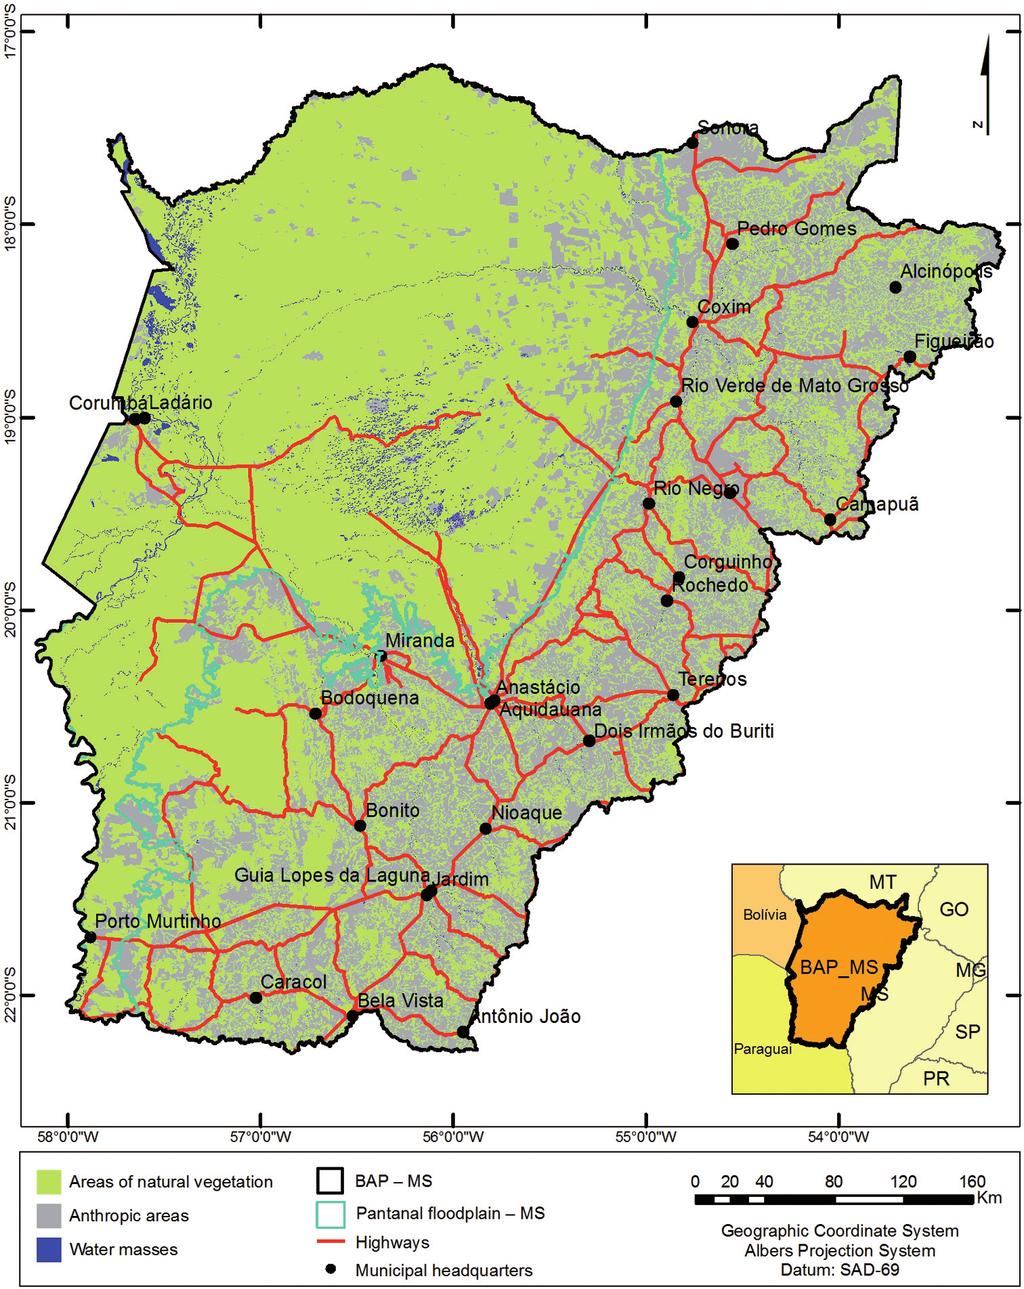 1 - Quantification of mapping from vegetation cover on the Pantanal, Plateau